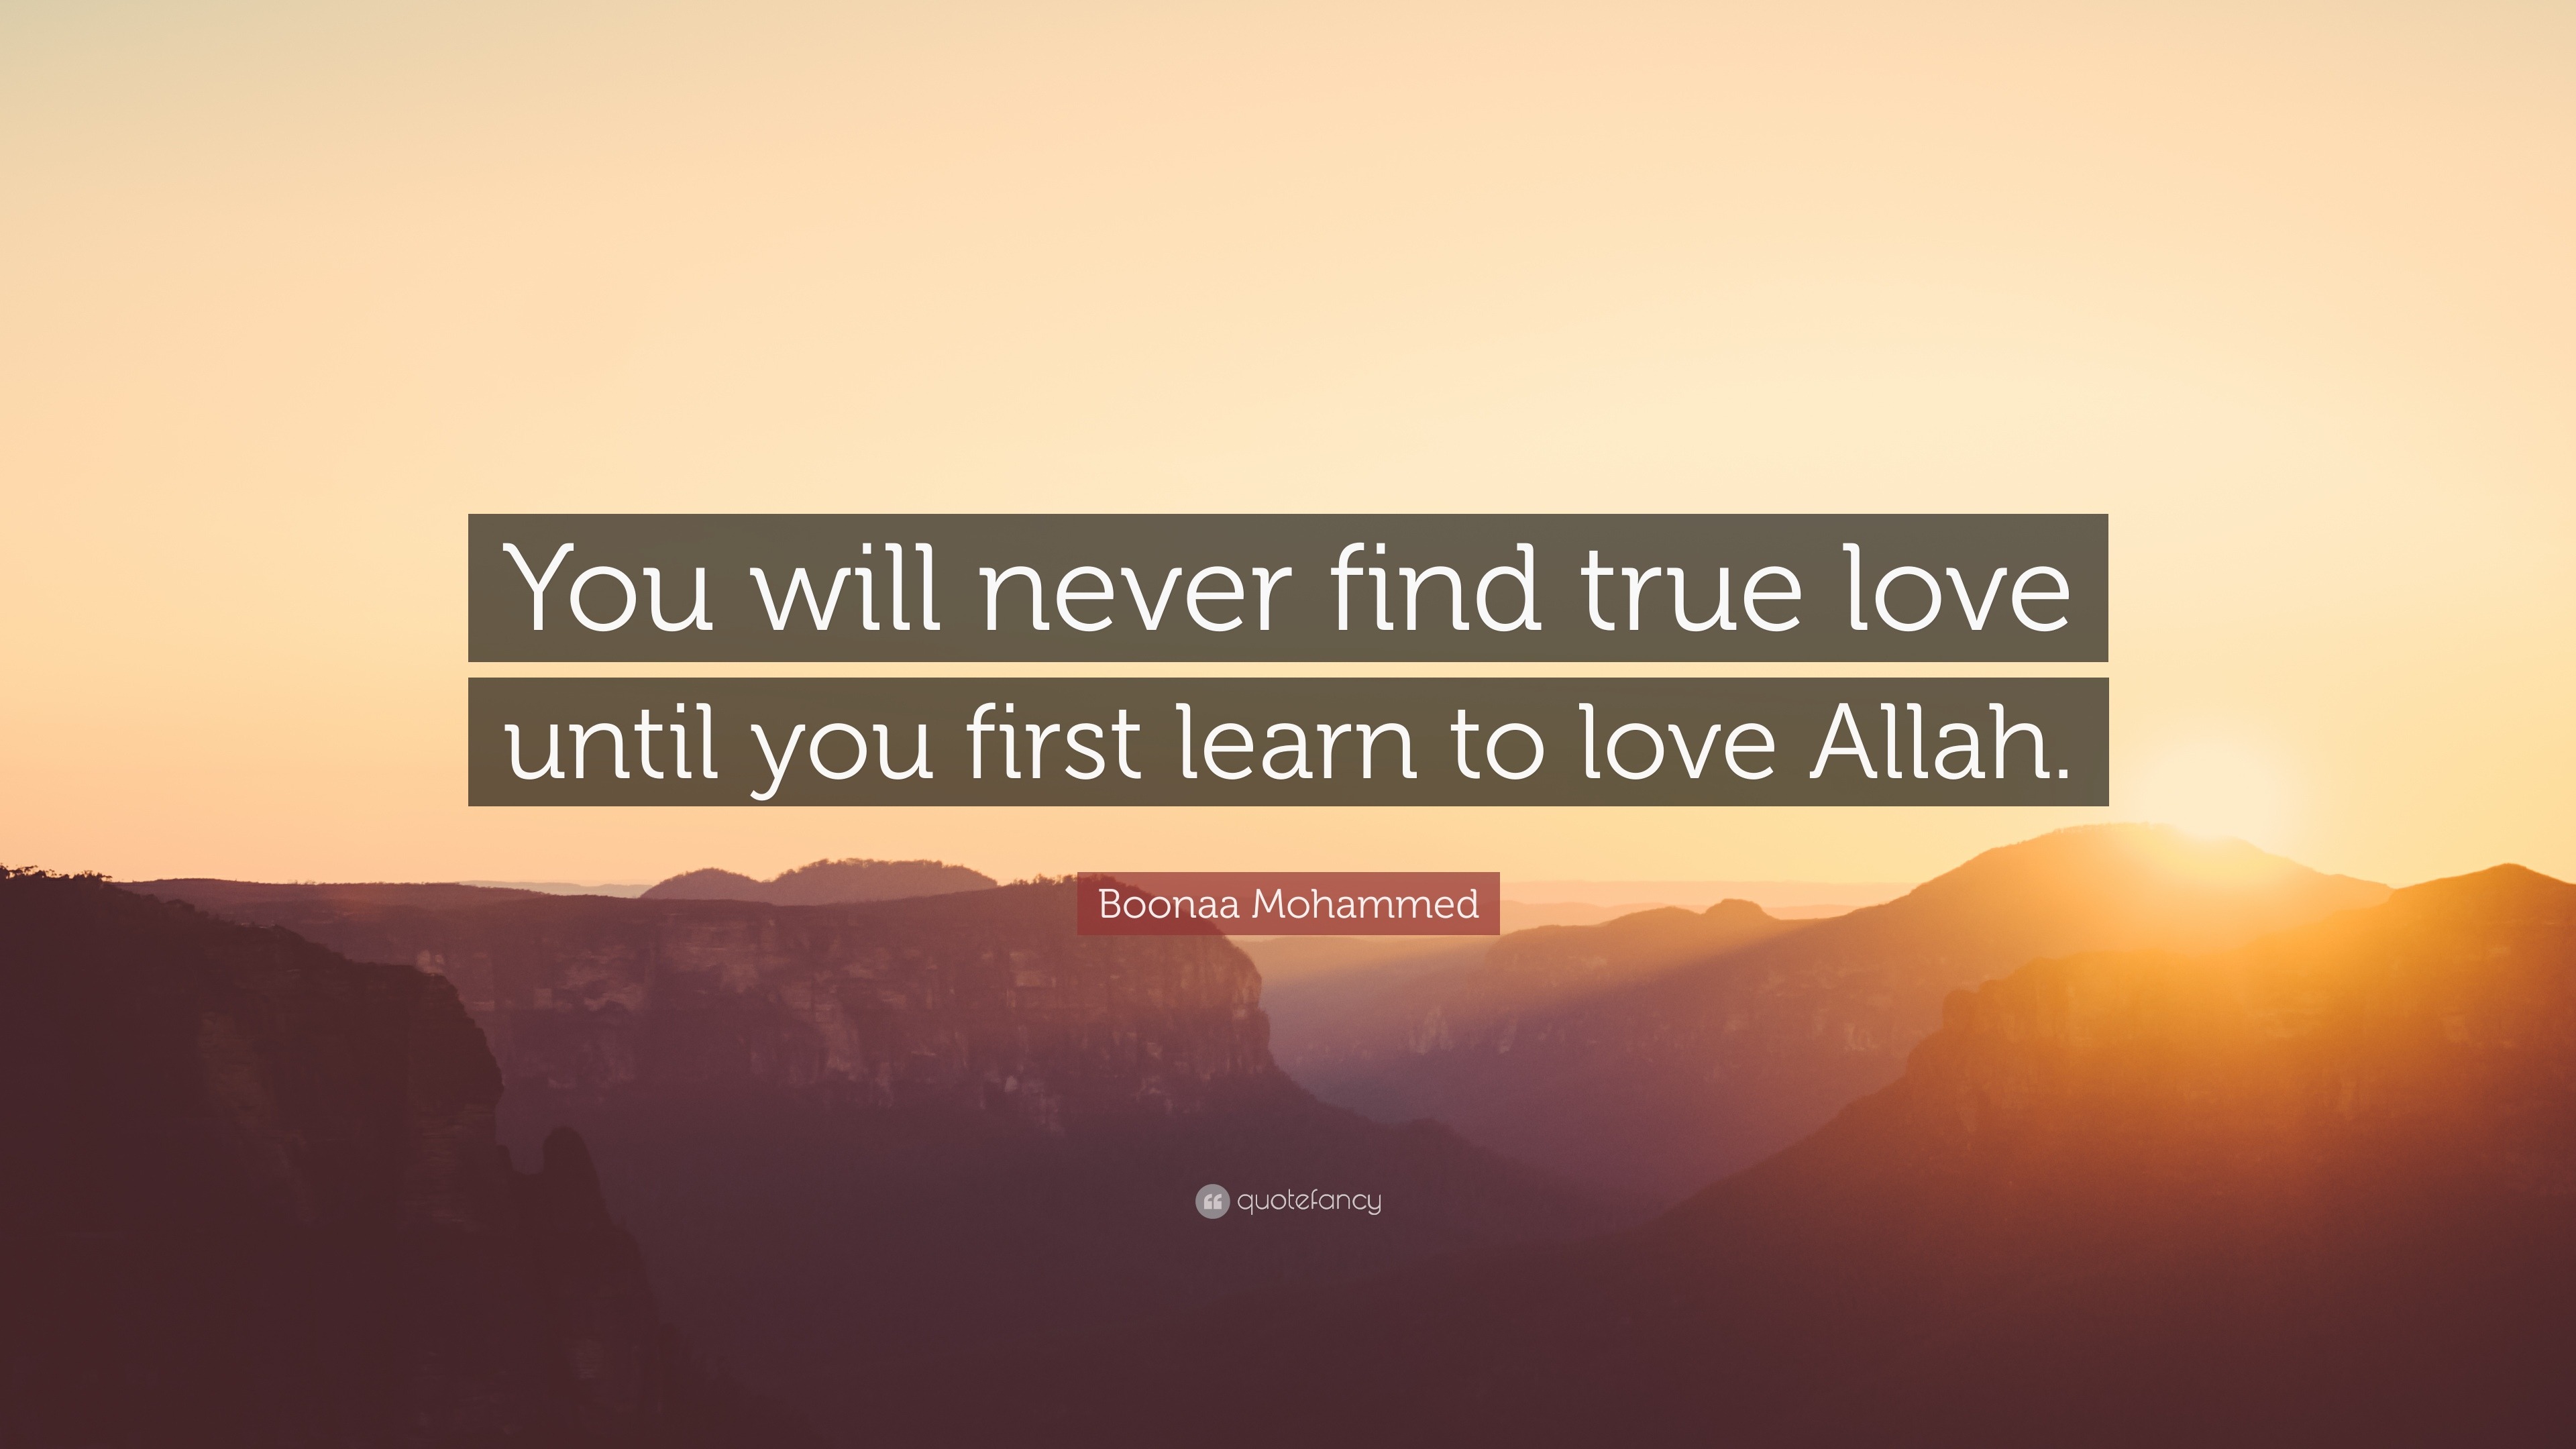 Boonaa Mohammed Quote “You will never find true love until you first learn to